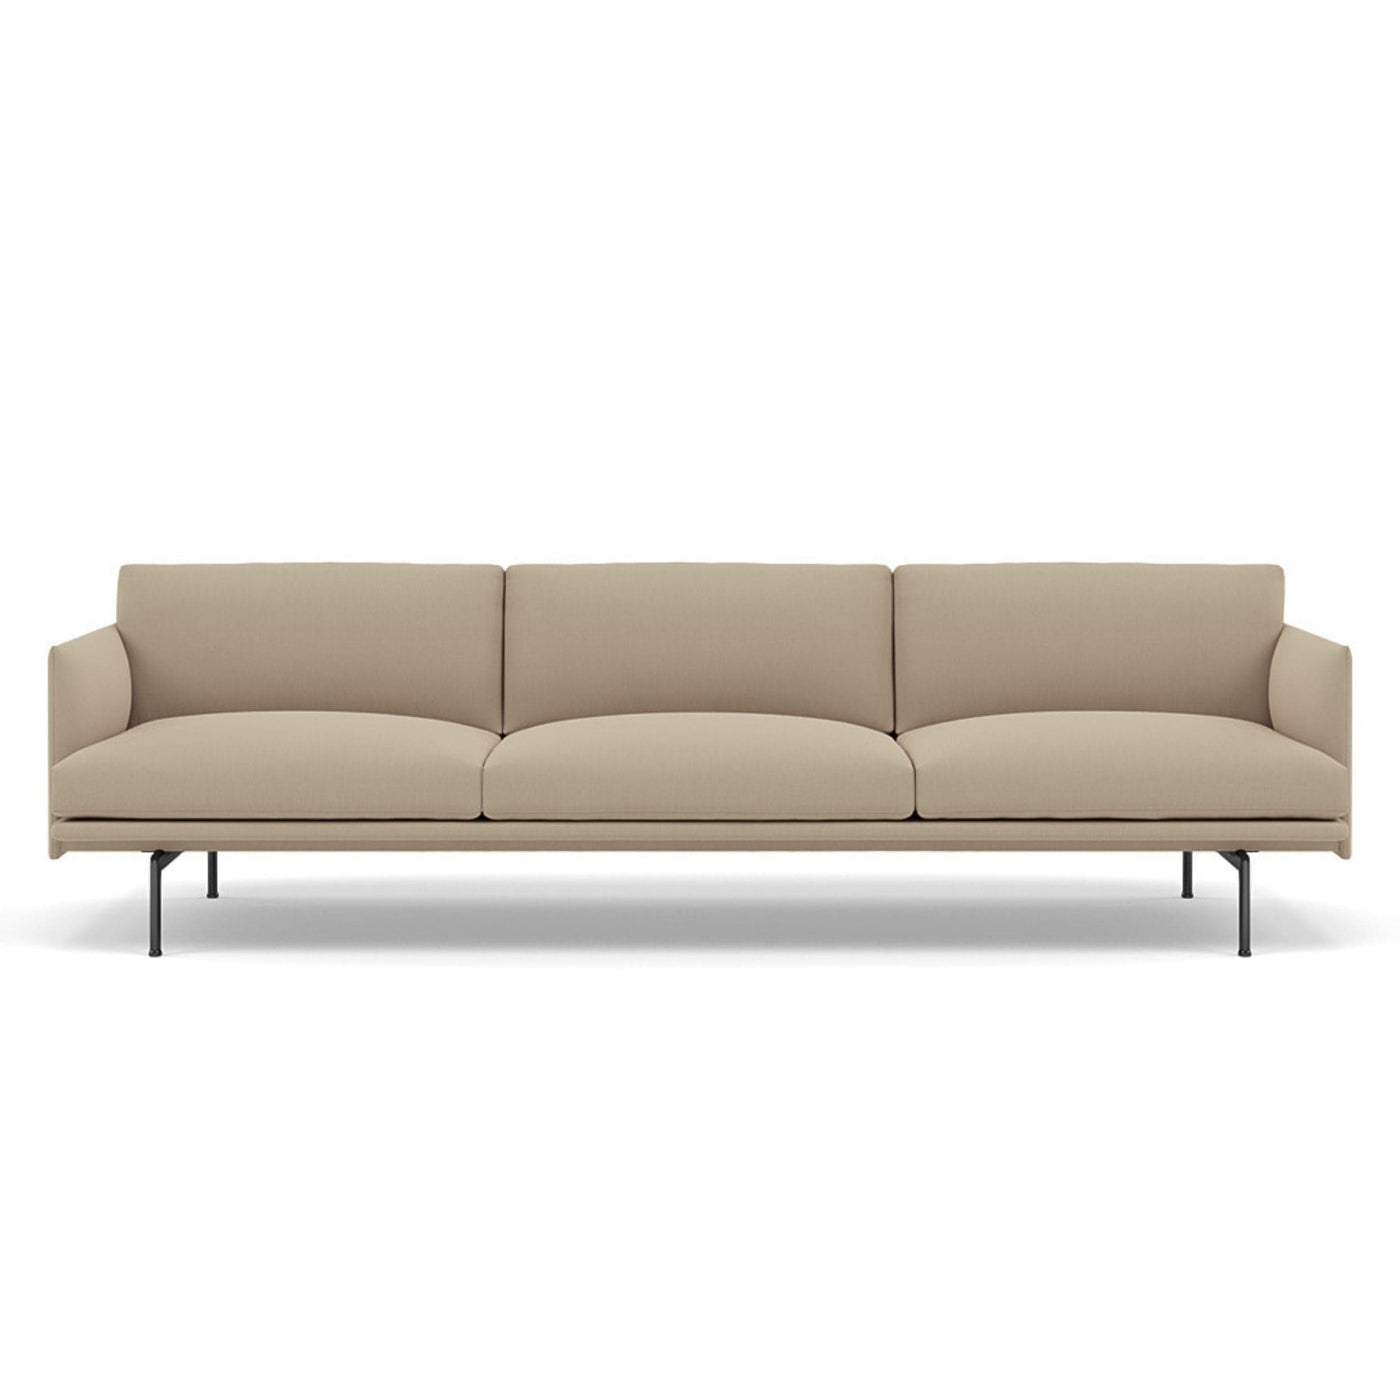 muuto outline 3.5 seater sofa in clara 248 natural fabric and black legs. Made to order from someday designs. #colour_clara-248